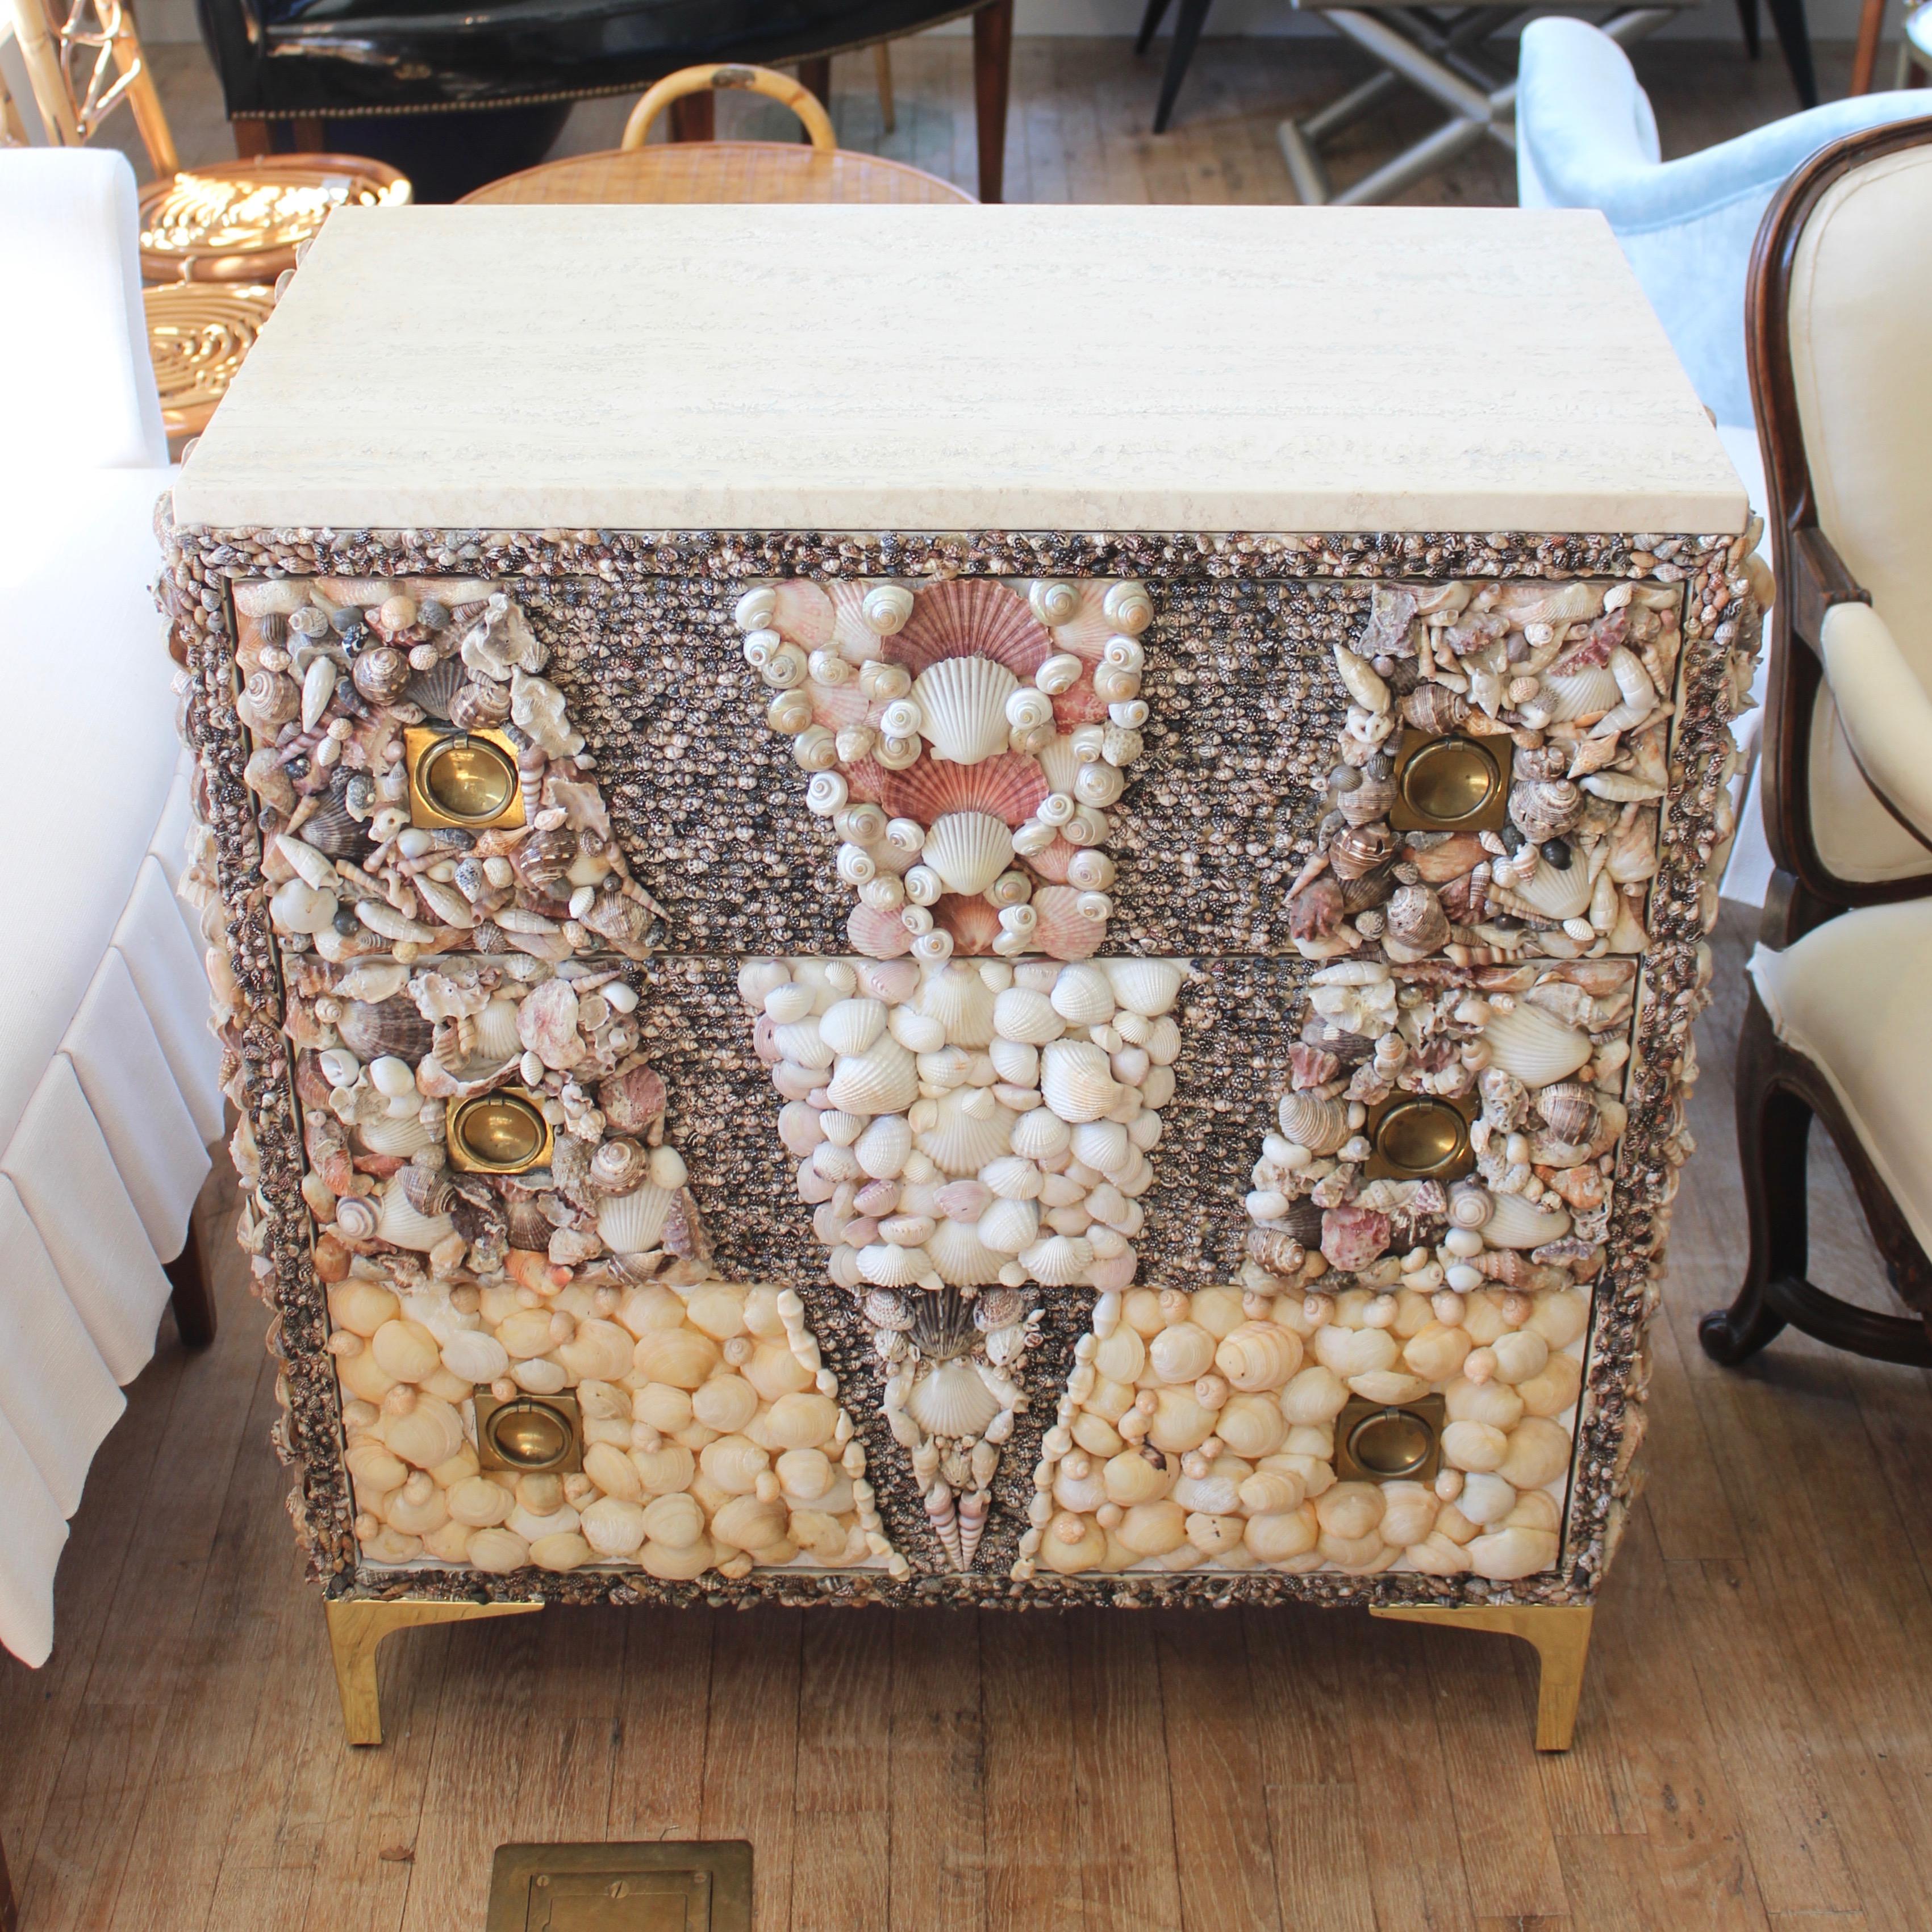 Campaign style chest covered in shells with a honed travertine top and brass legs.